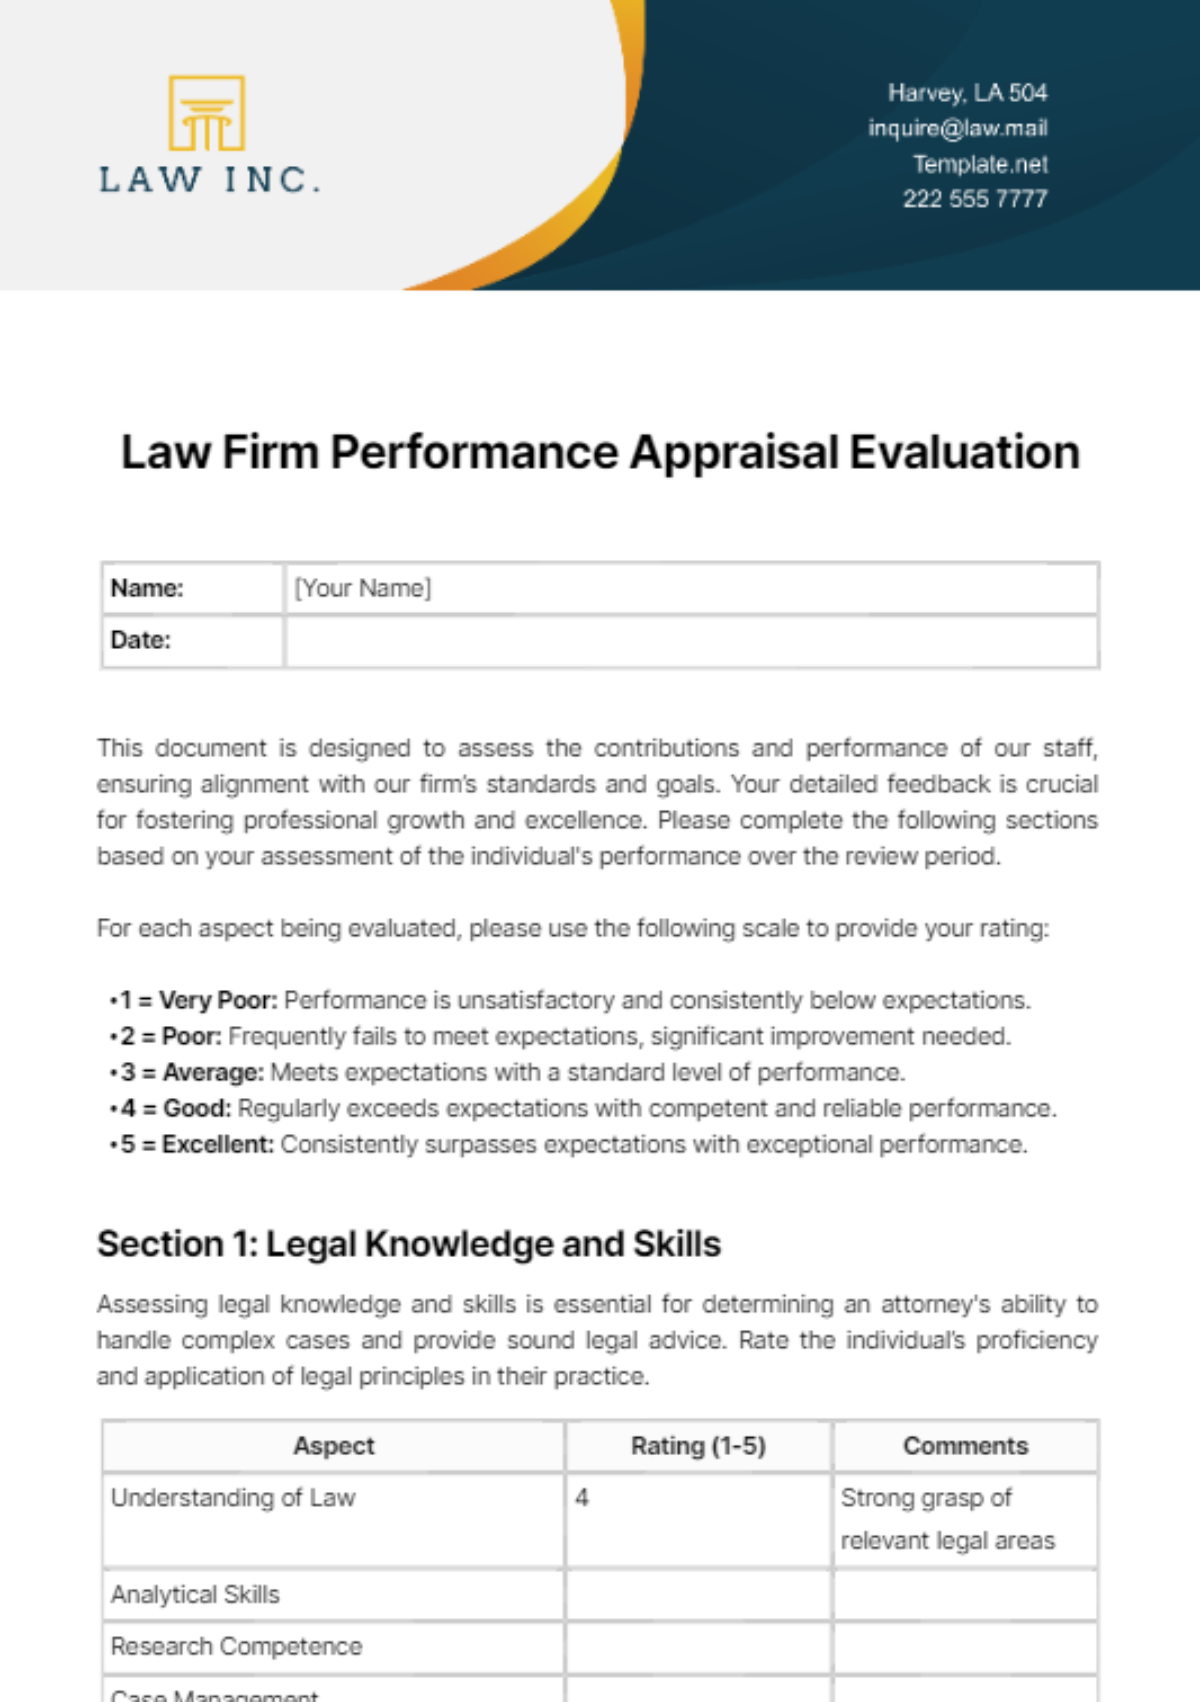 Law Firm Performance Appraisal Evaluation Template